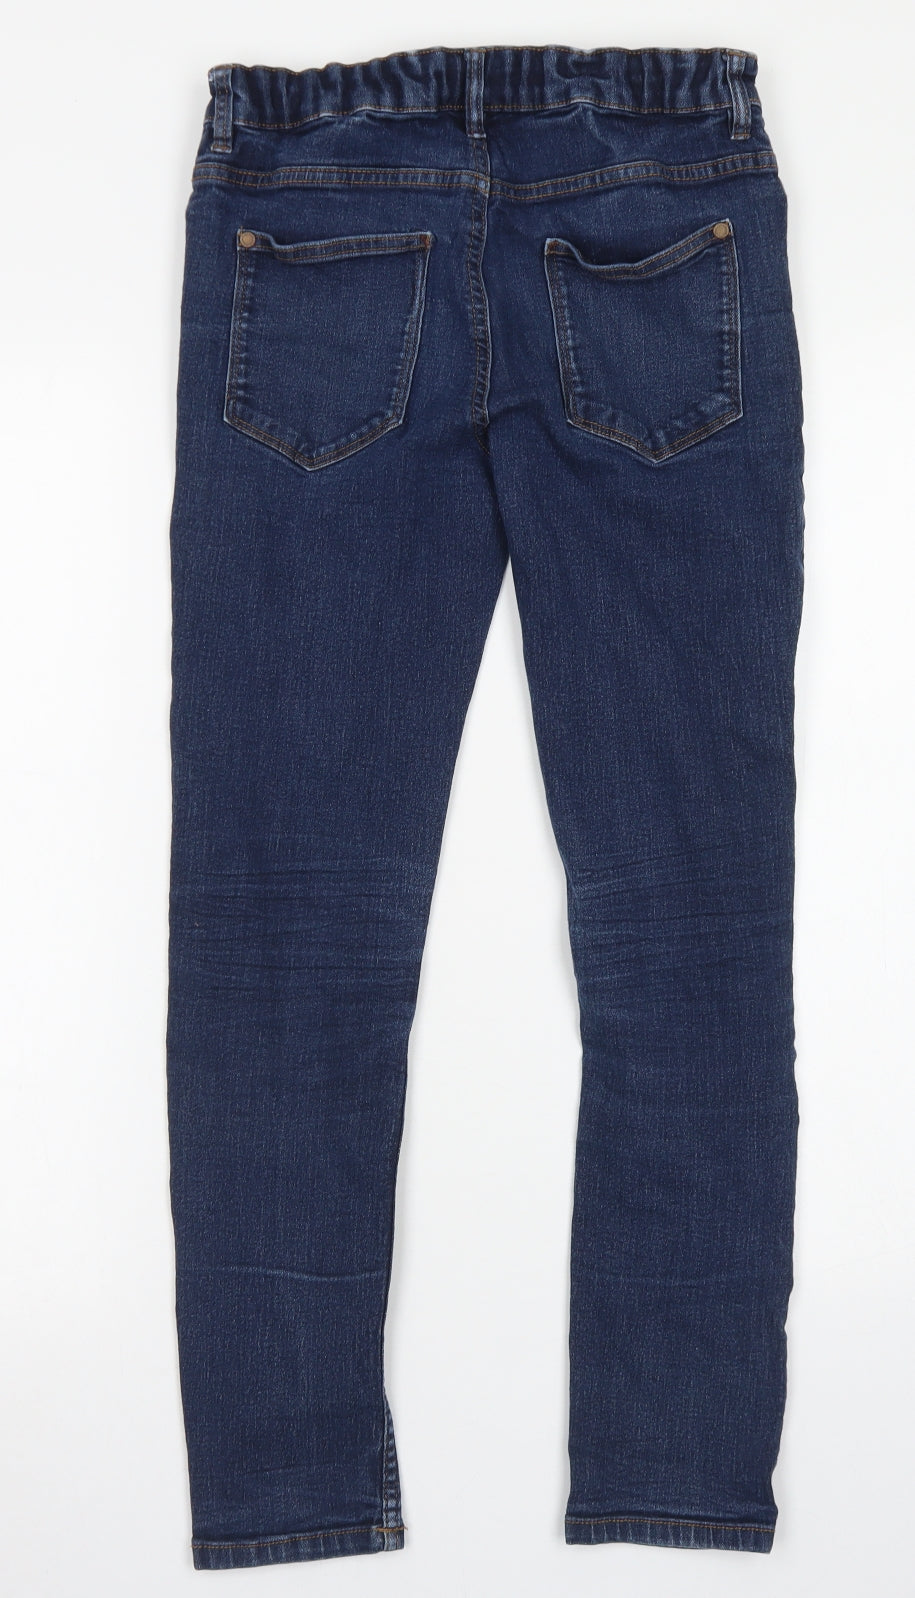 NEXT Girls Blue  Cotton Skinny Jeans Size 13 Years  Regular Button